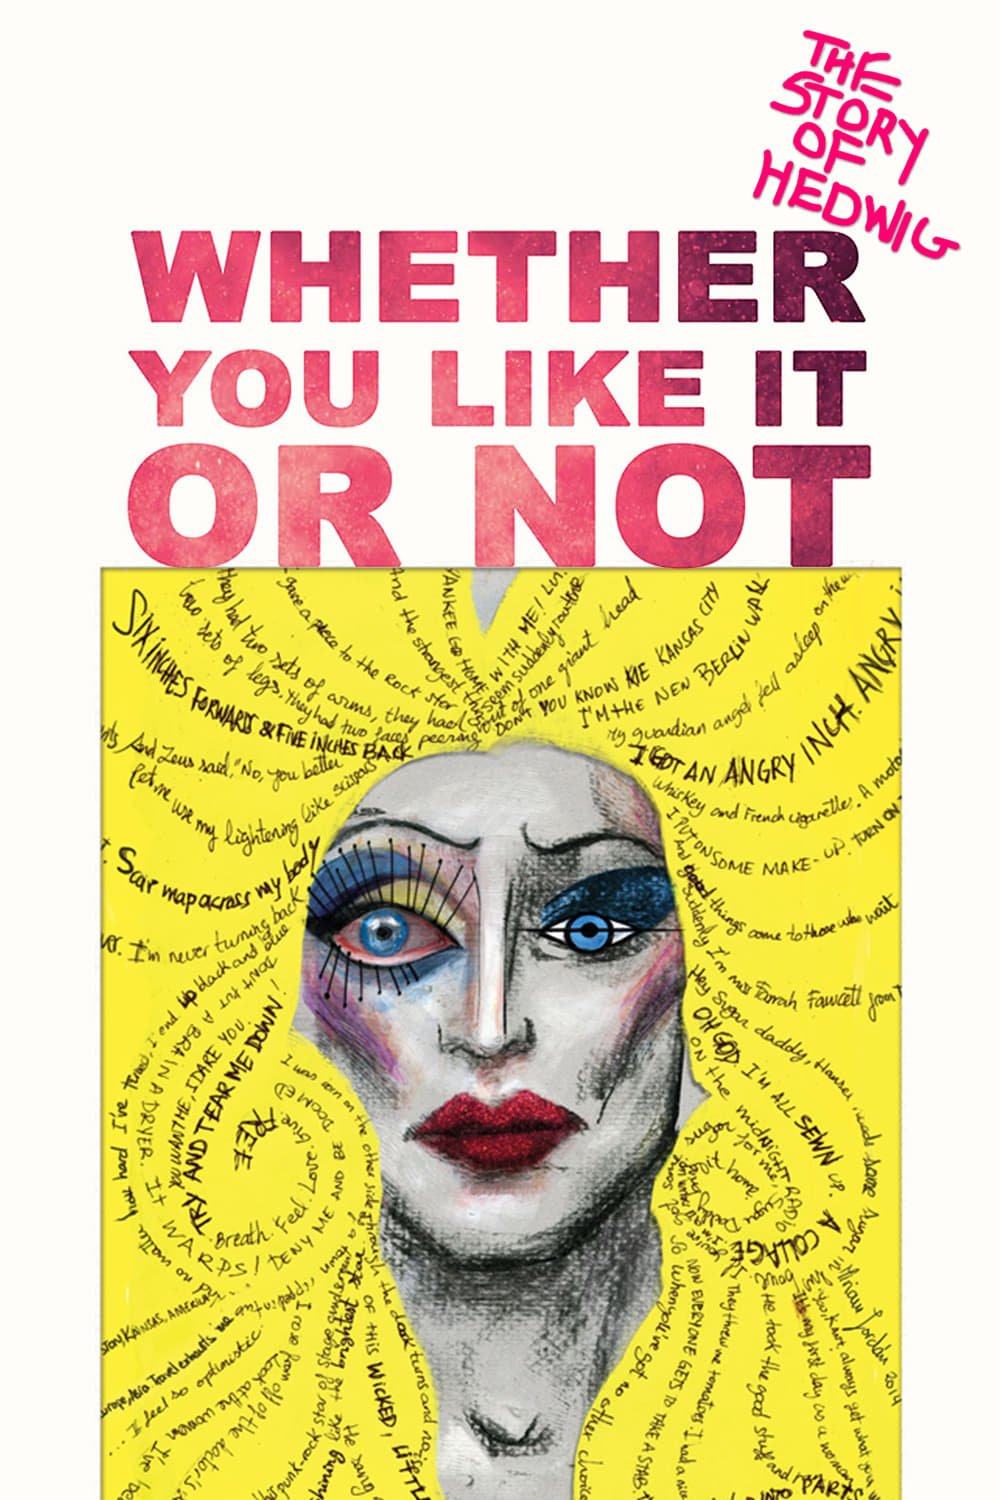 Whether You Like It or Not: The Story of Hedwig (2003)